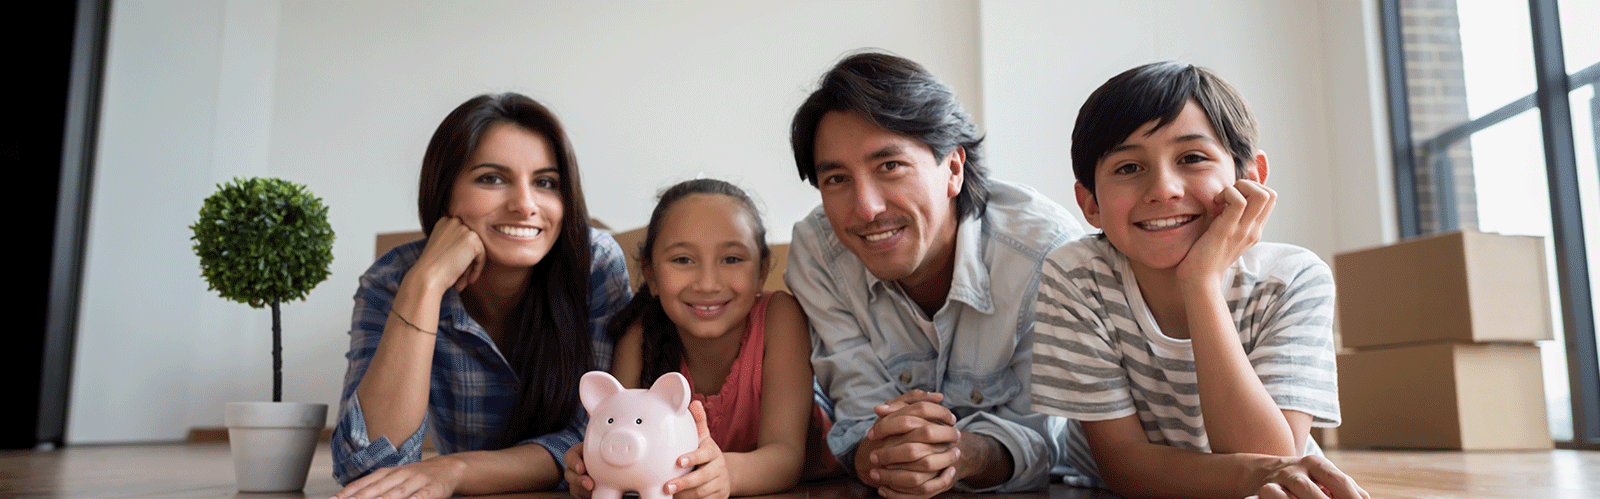 family on floor behind piggy bank and smiling